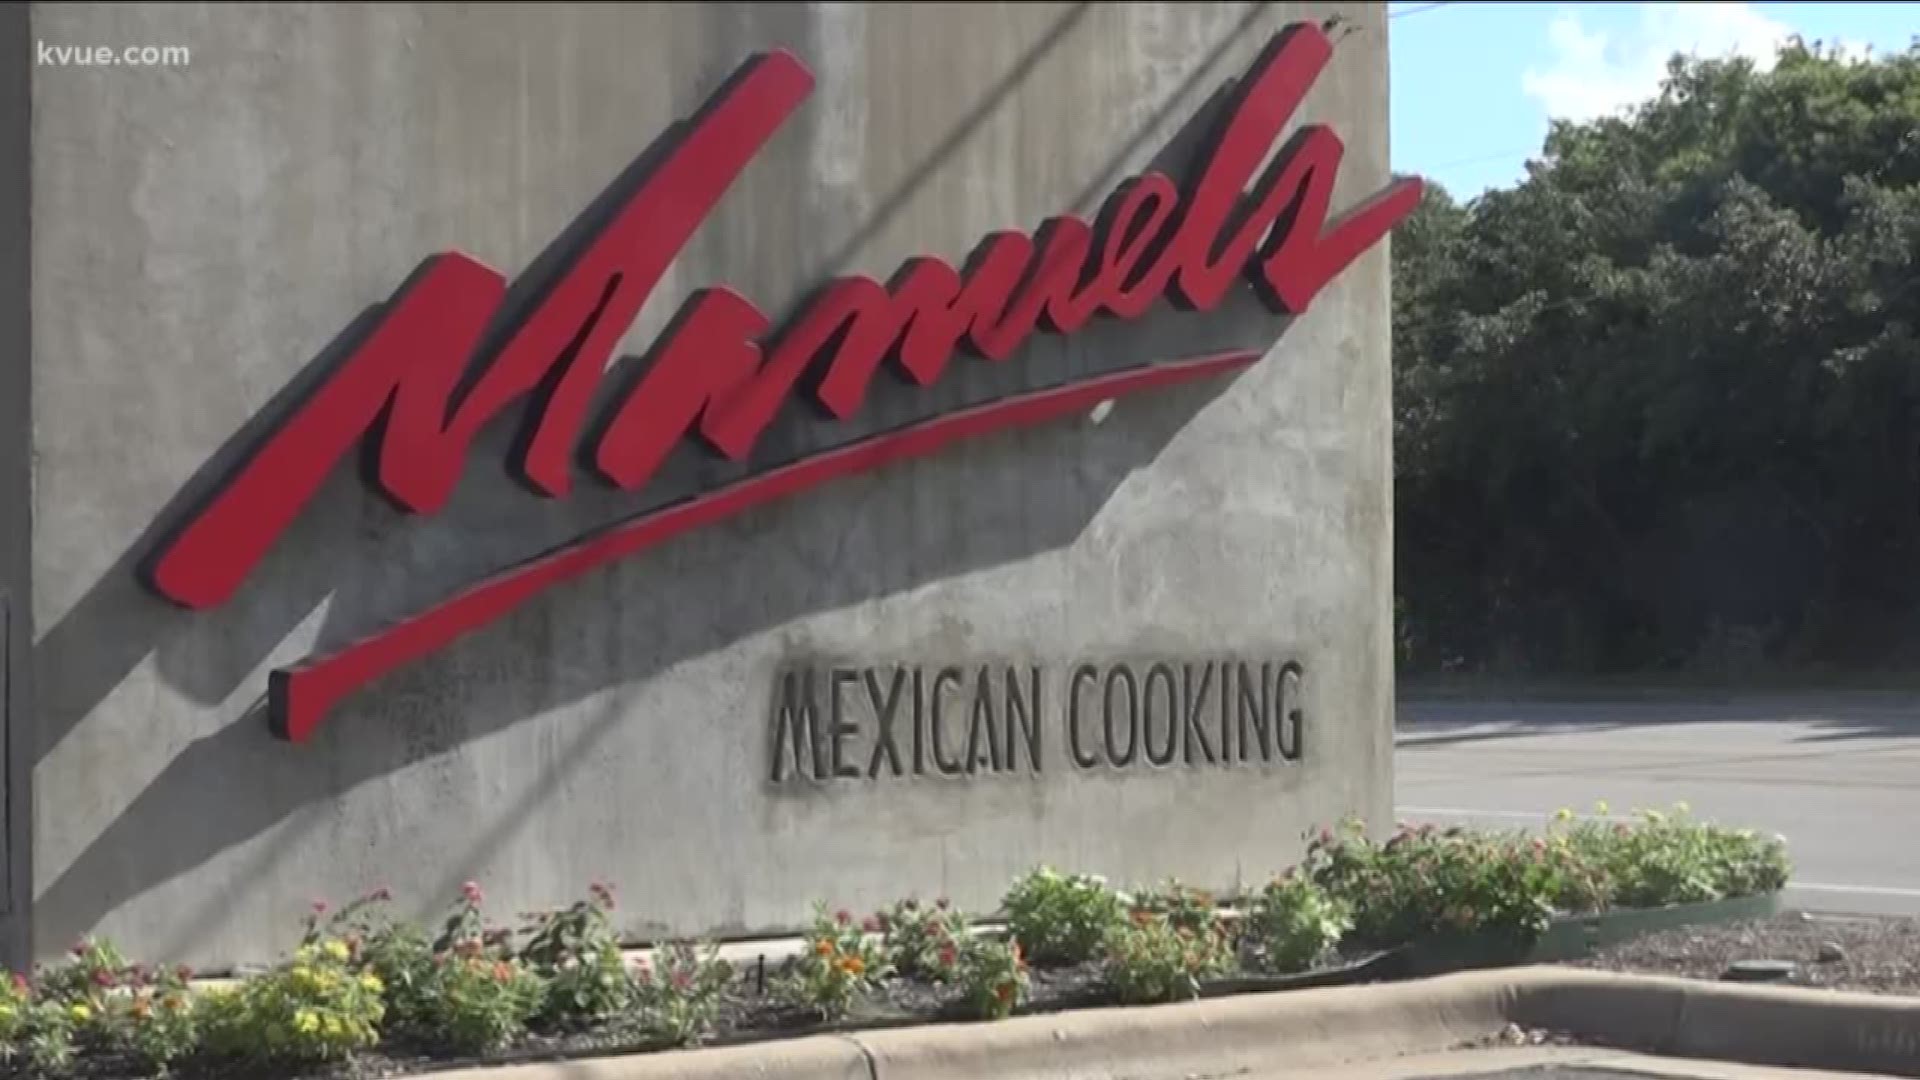 Manuel's is staying put and not closing down like so many other old Austin businesses.